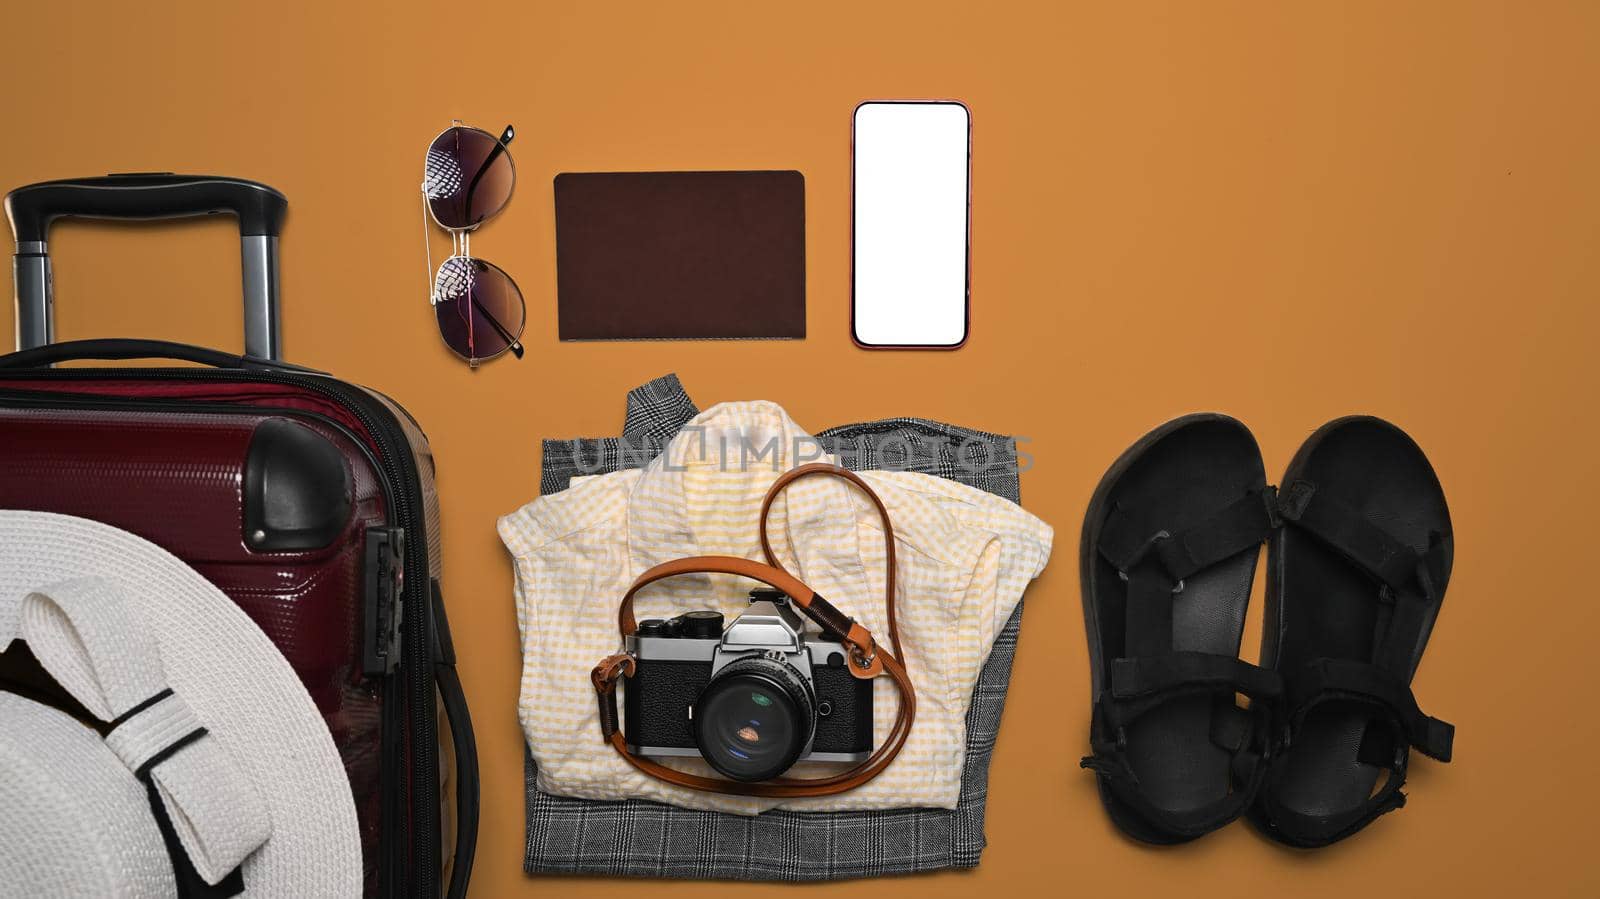 Suitcase with traveler accessories on white orange background. Packing for a new journey.